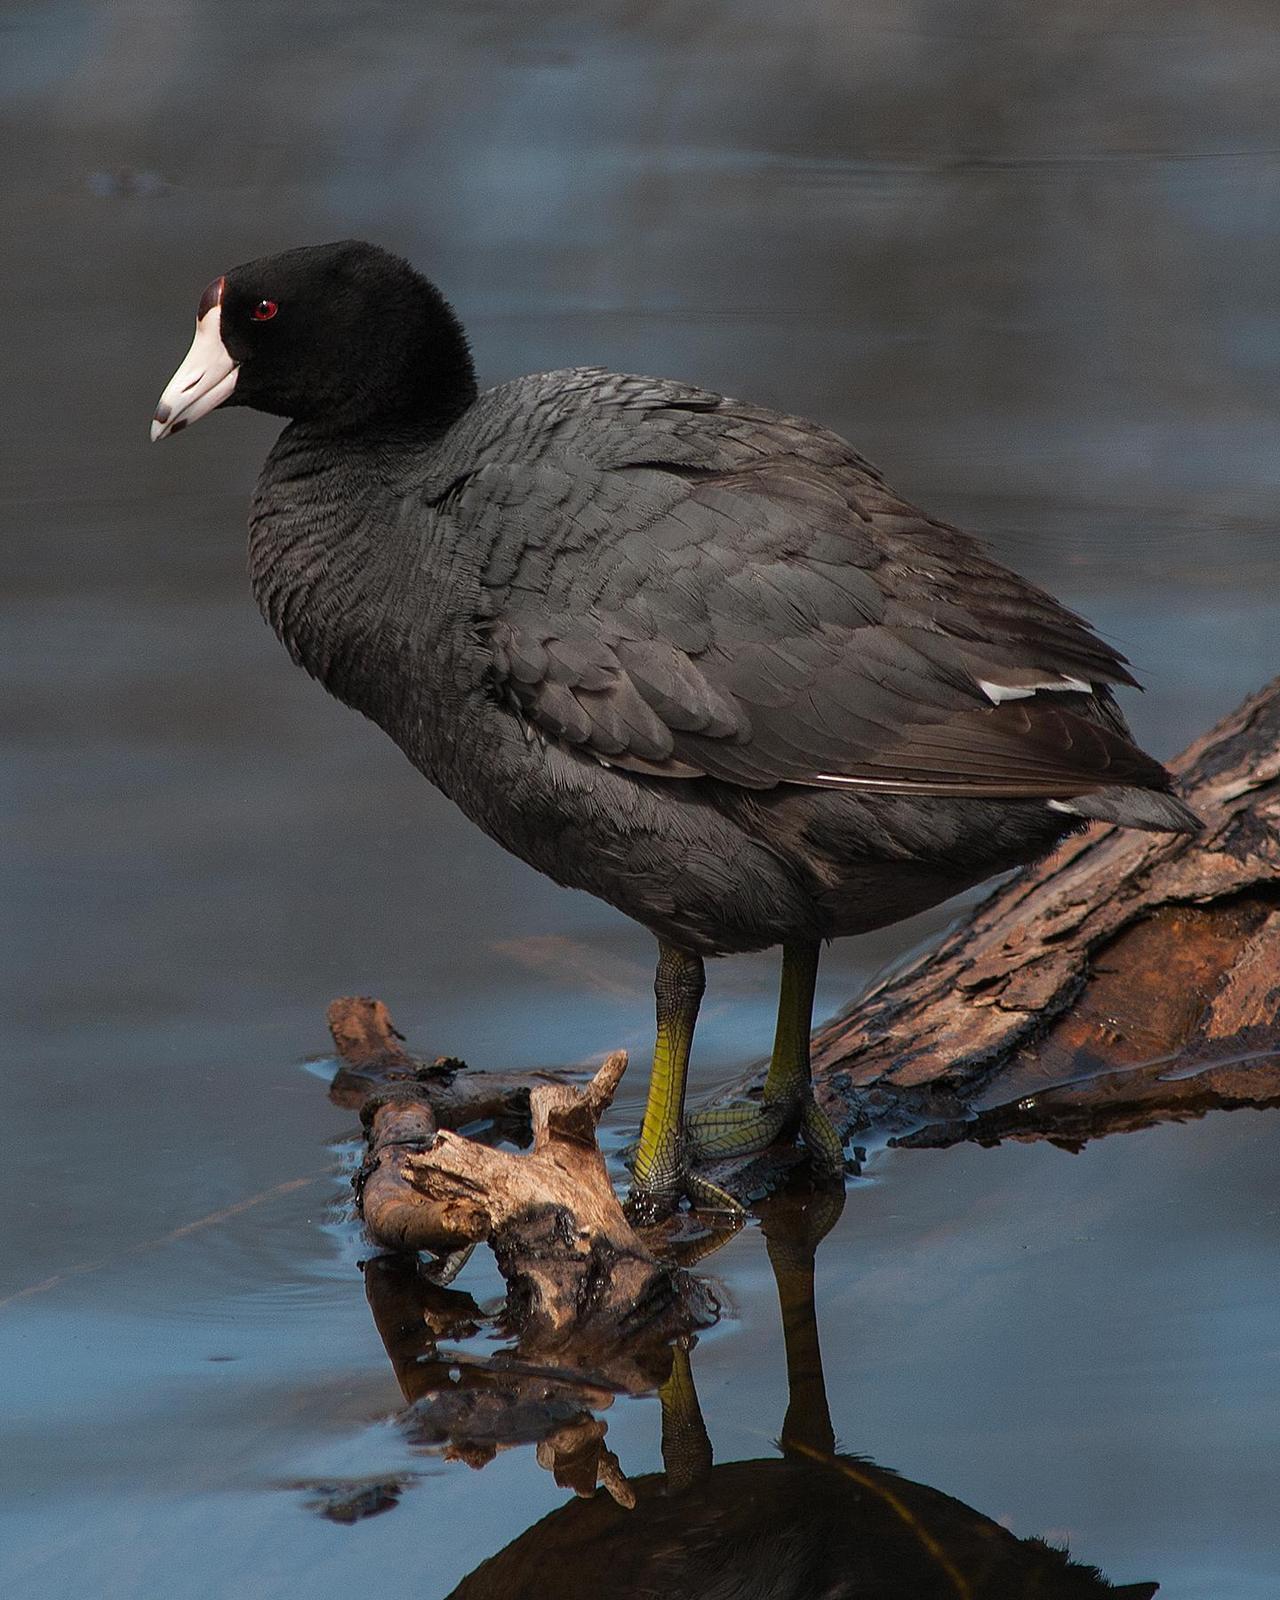 American Coot Photo by Mark Blassage